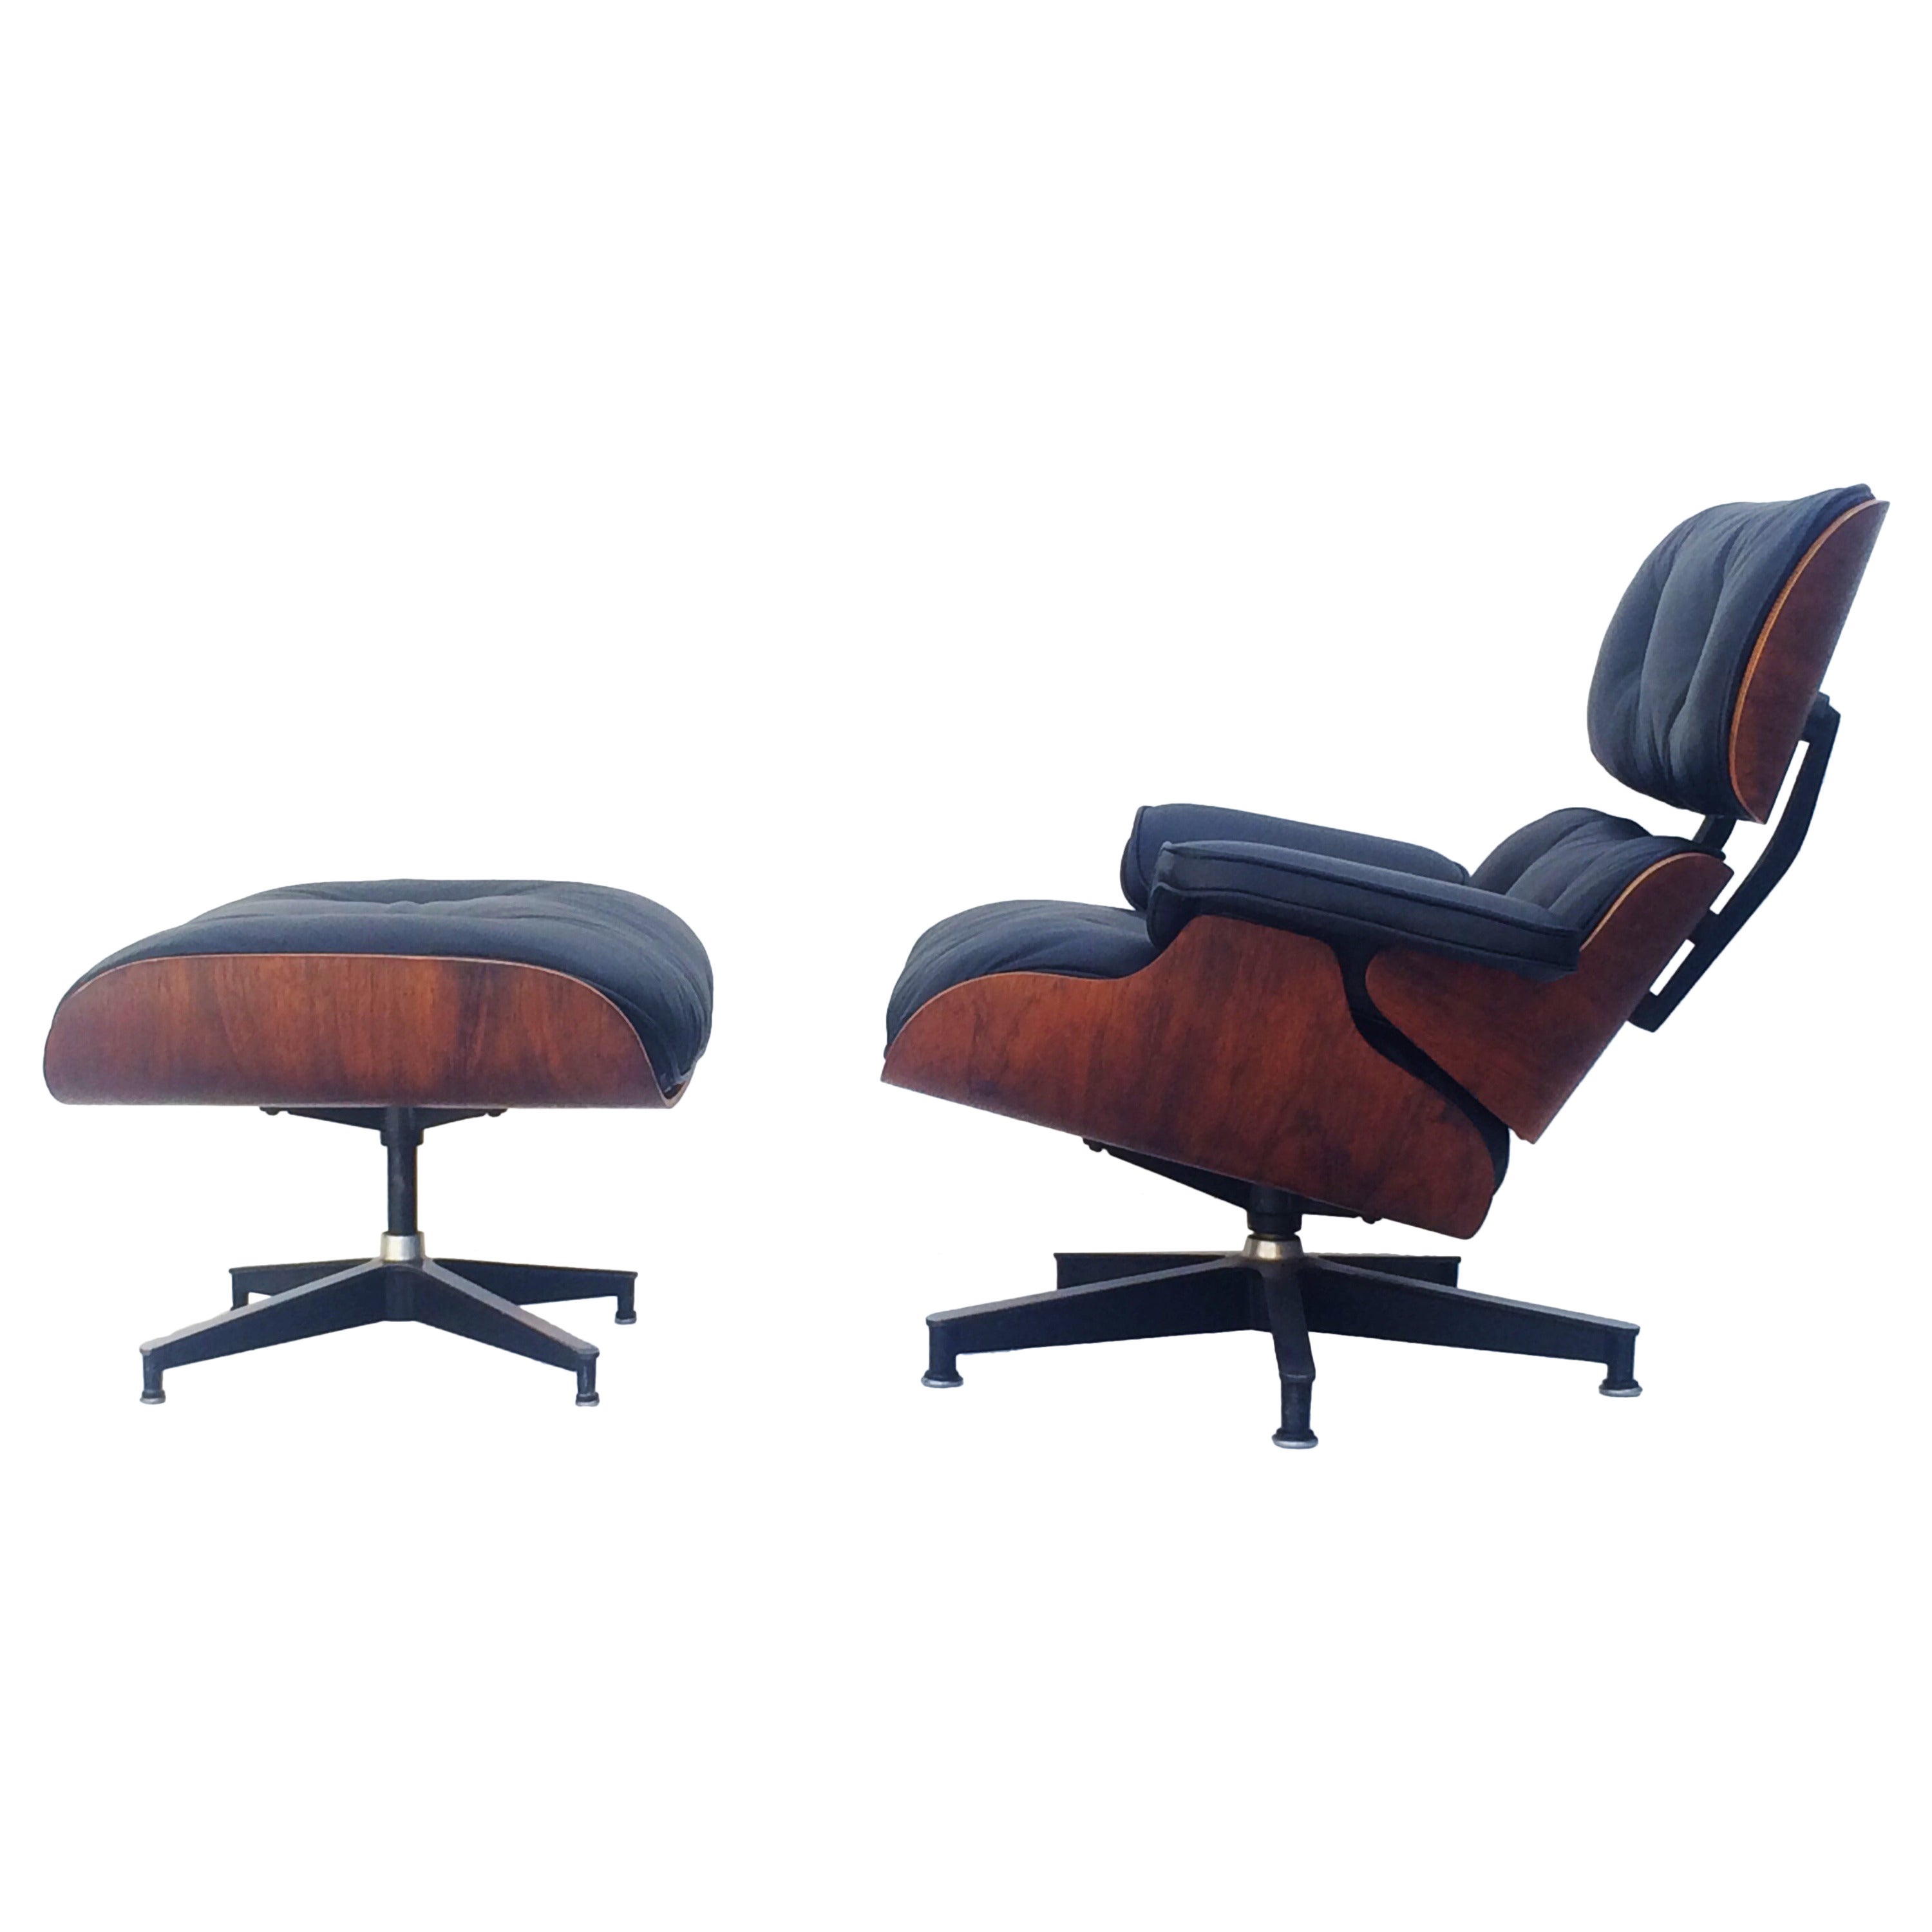 Early Rosewood Eames Lounge Chairs with Ottoman